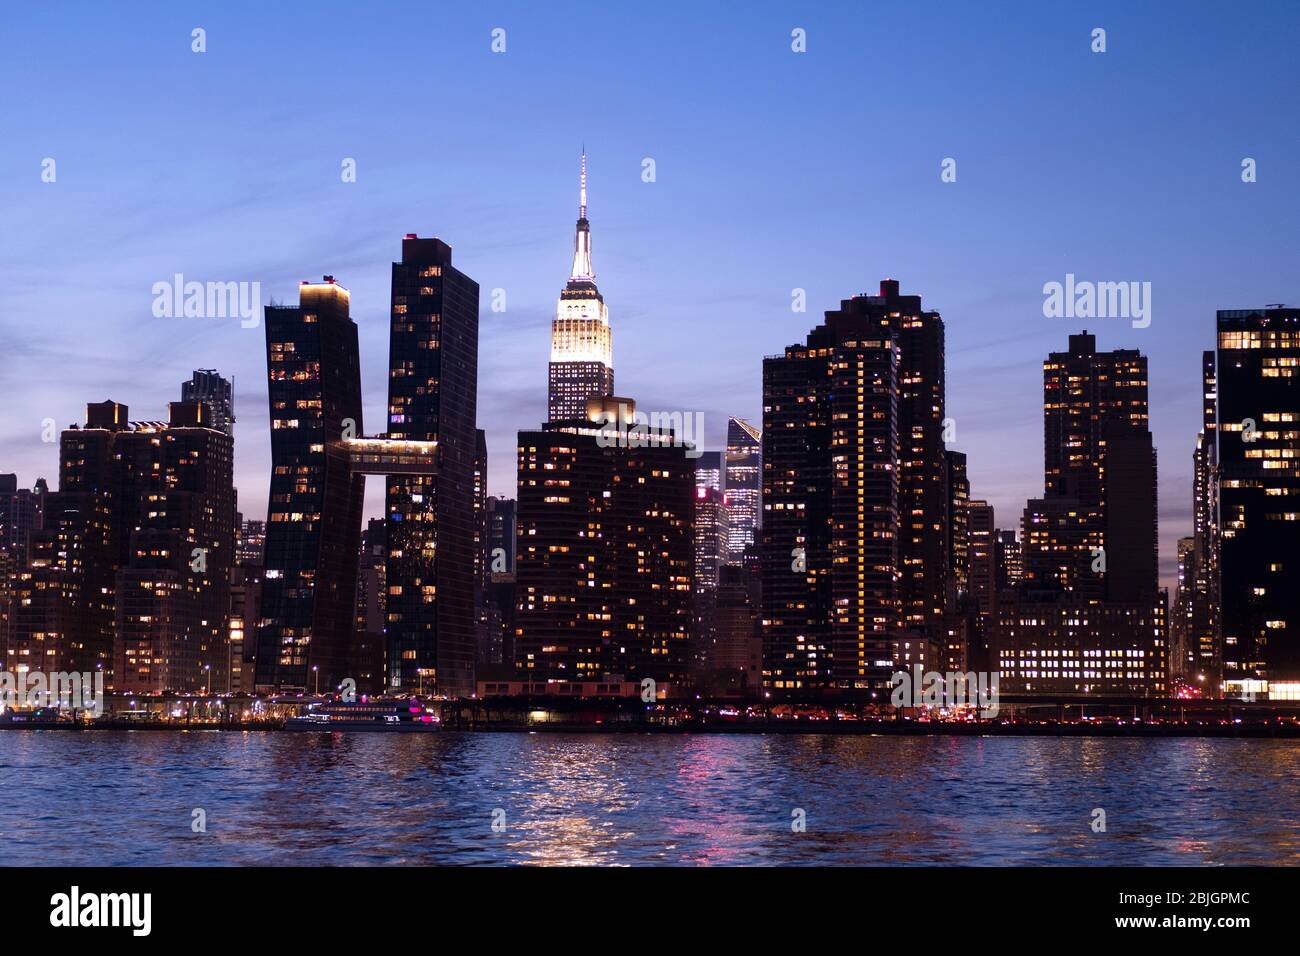 Dusk view of the Manhattan Skyline with the prominent Empire State Building viewed from the East River in New York City Stock Photo